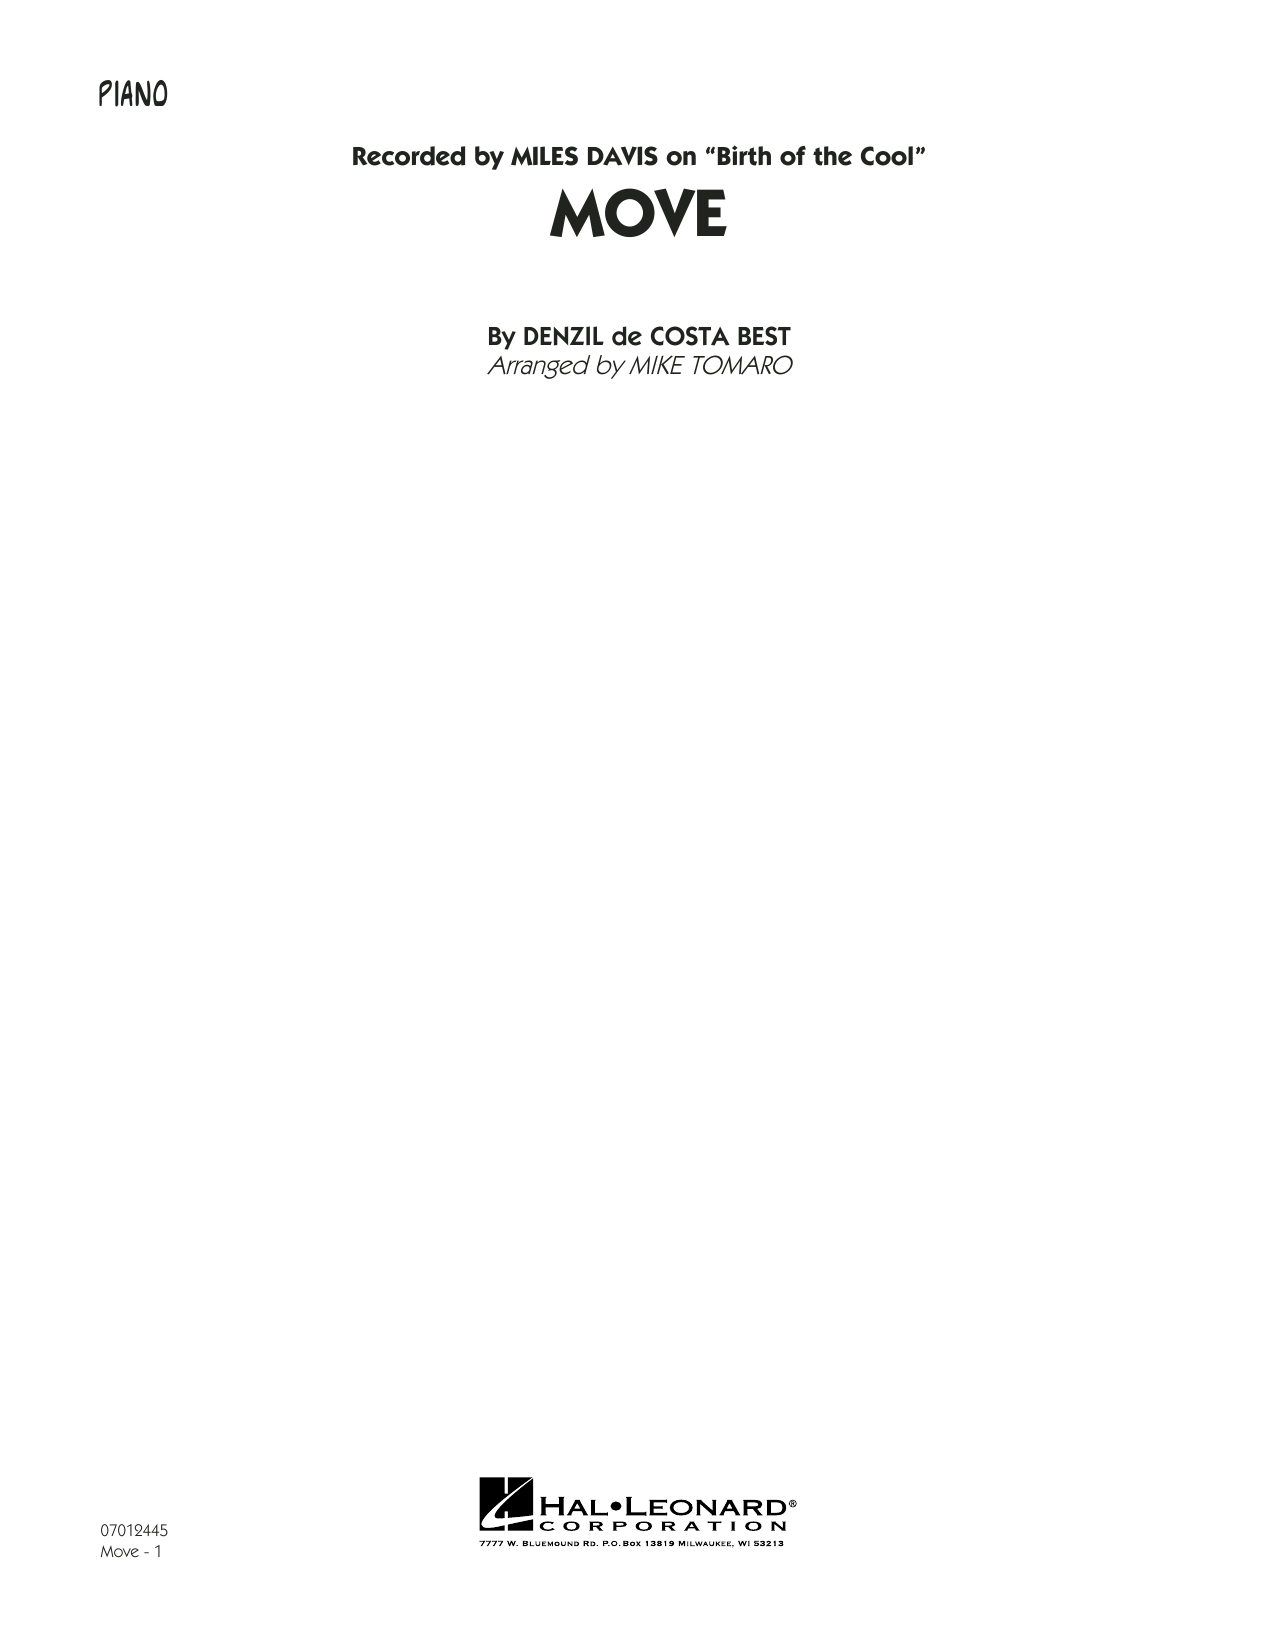 Mike Tomaro Move - Piano sheet music notes and chords. Download Printable PDF.